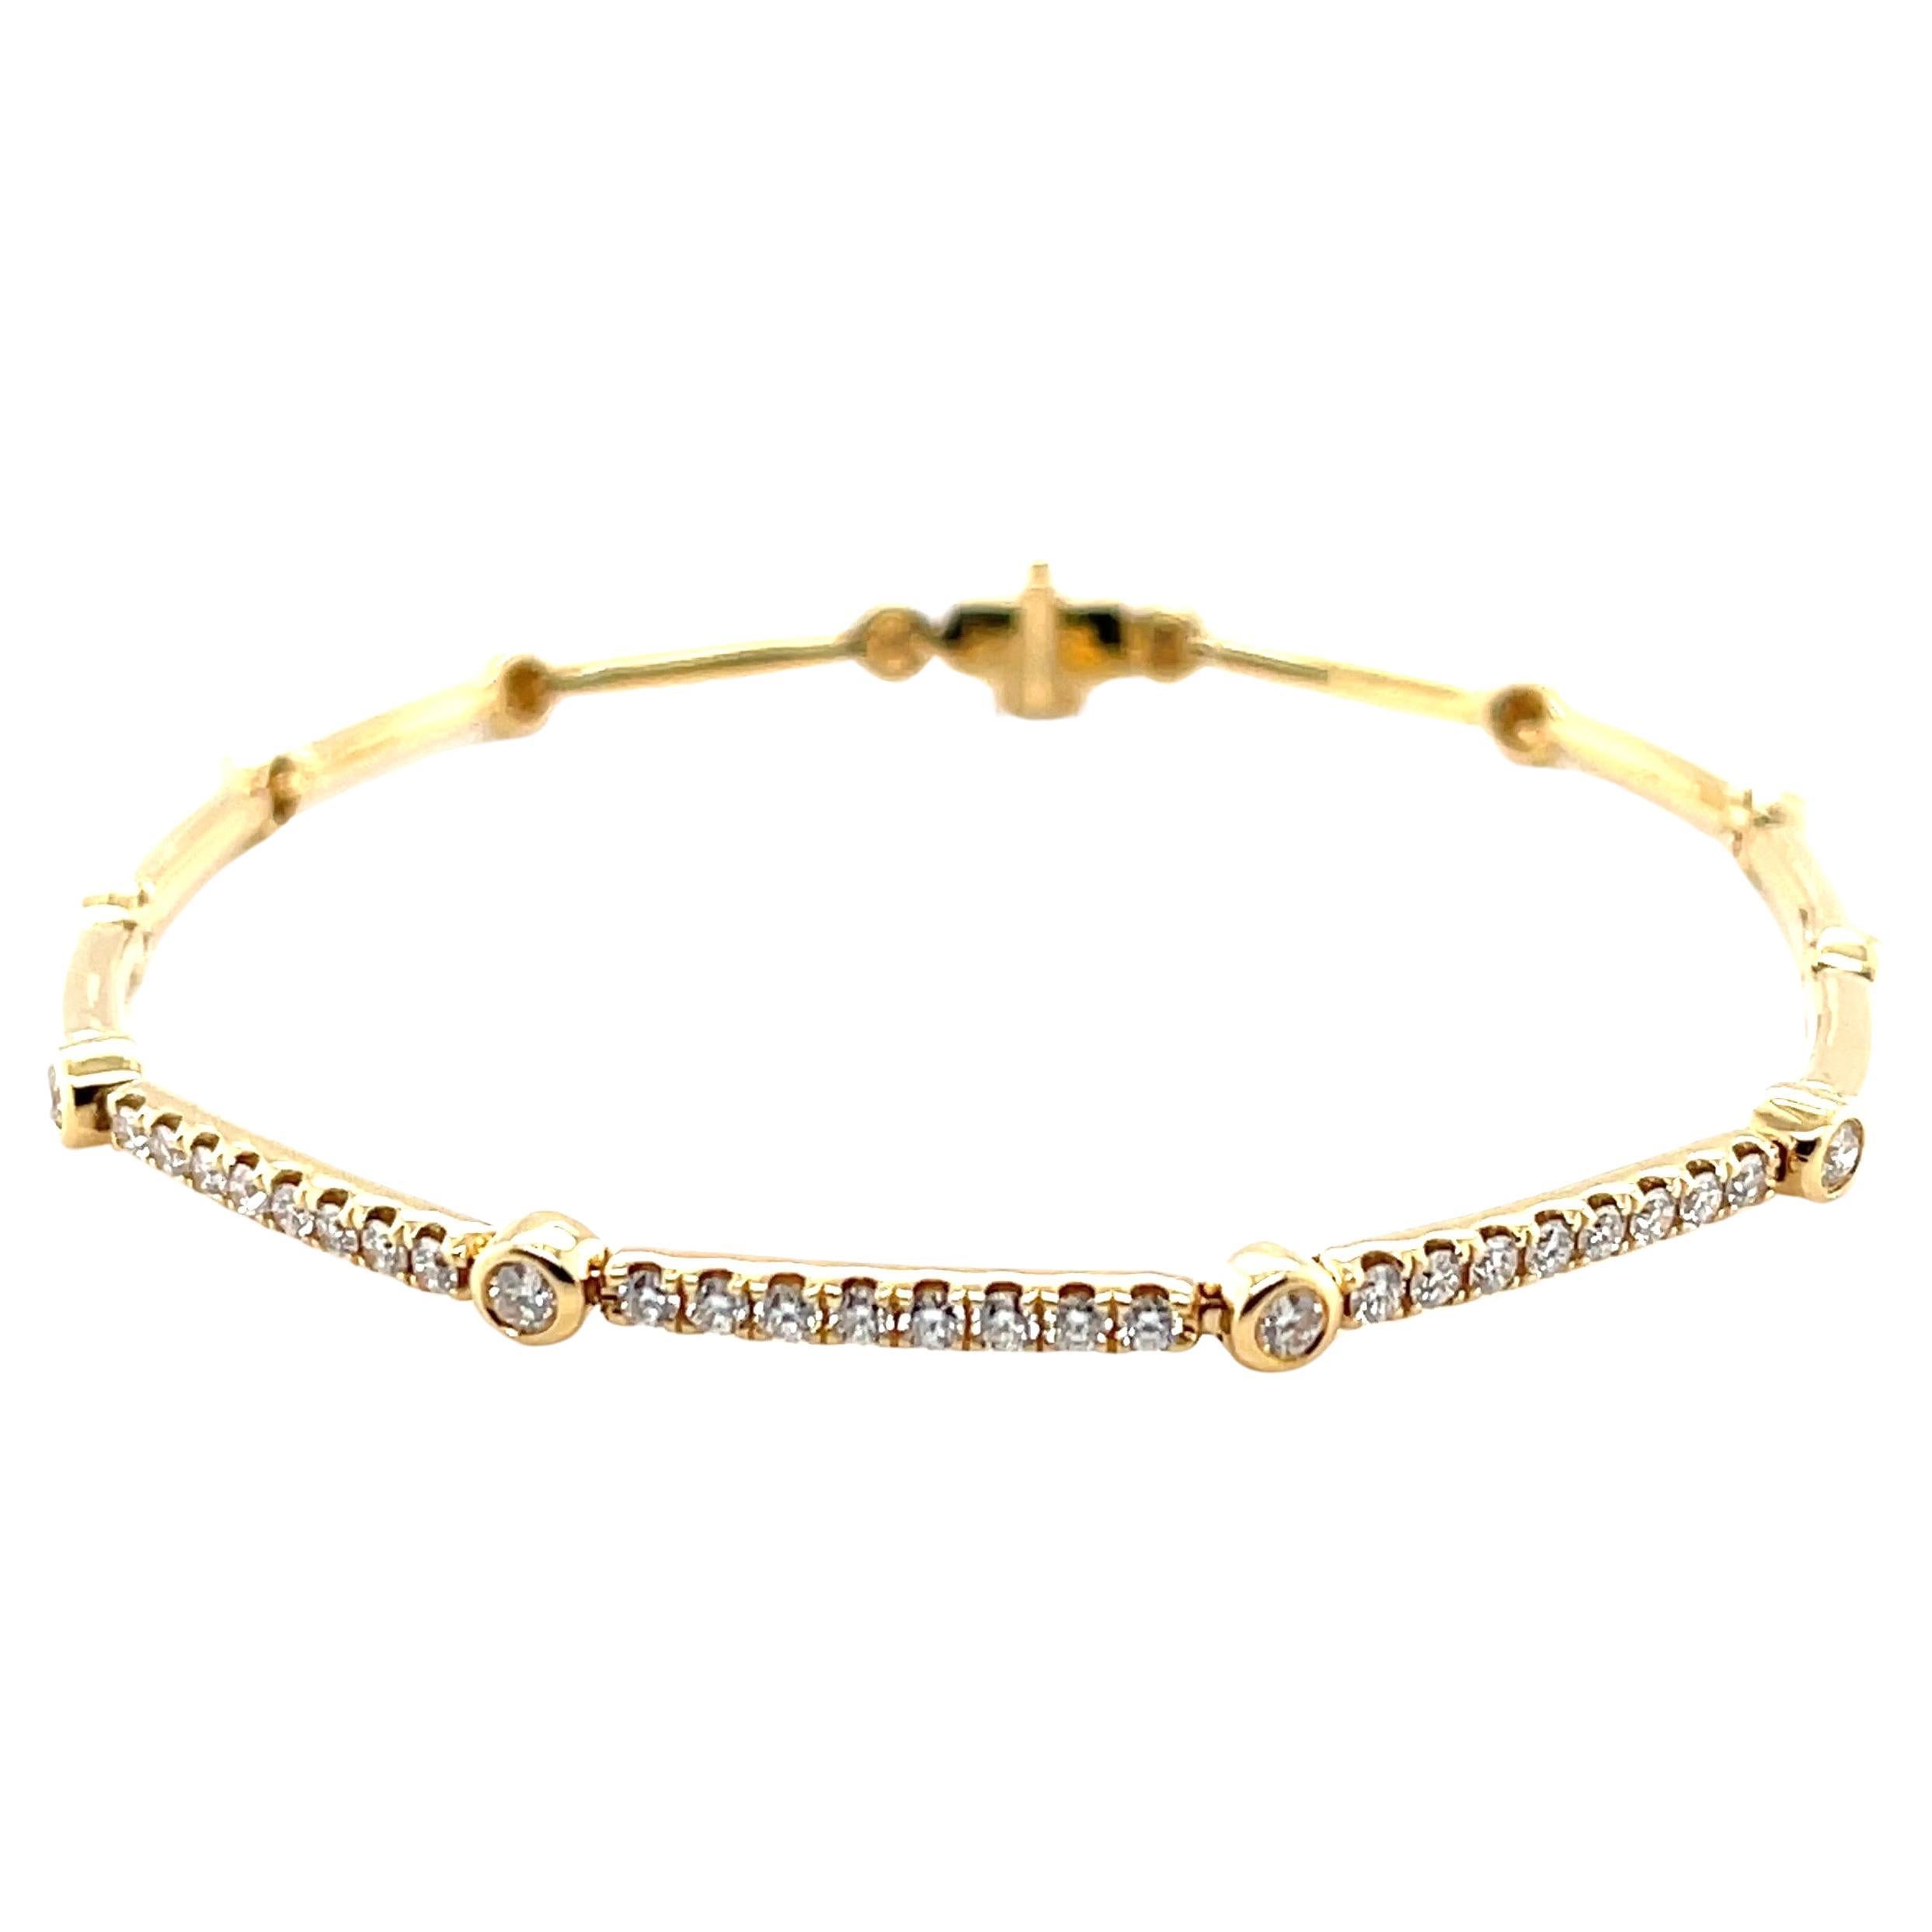 This beautifully elegant everyday bracelet has over a half carat of sparking diamonds set in 18k yellow gold! The unique 